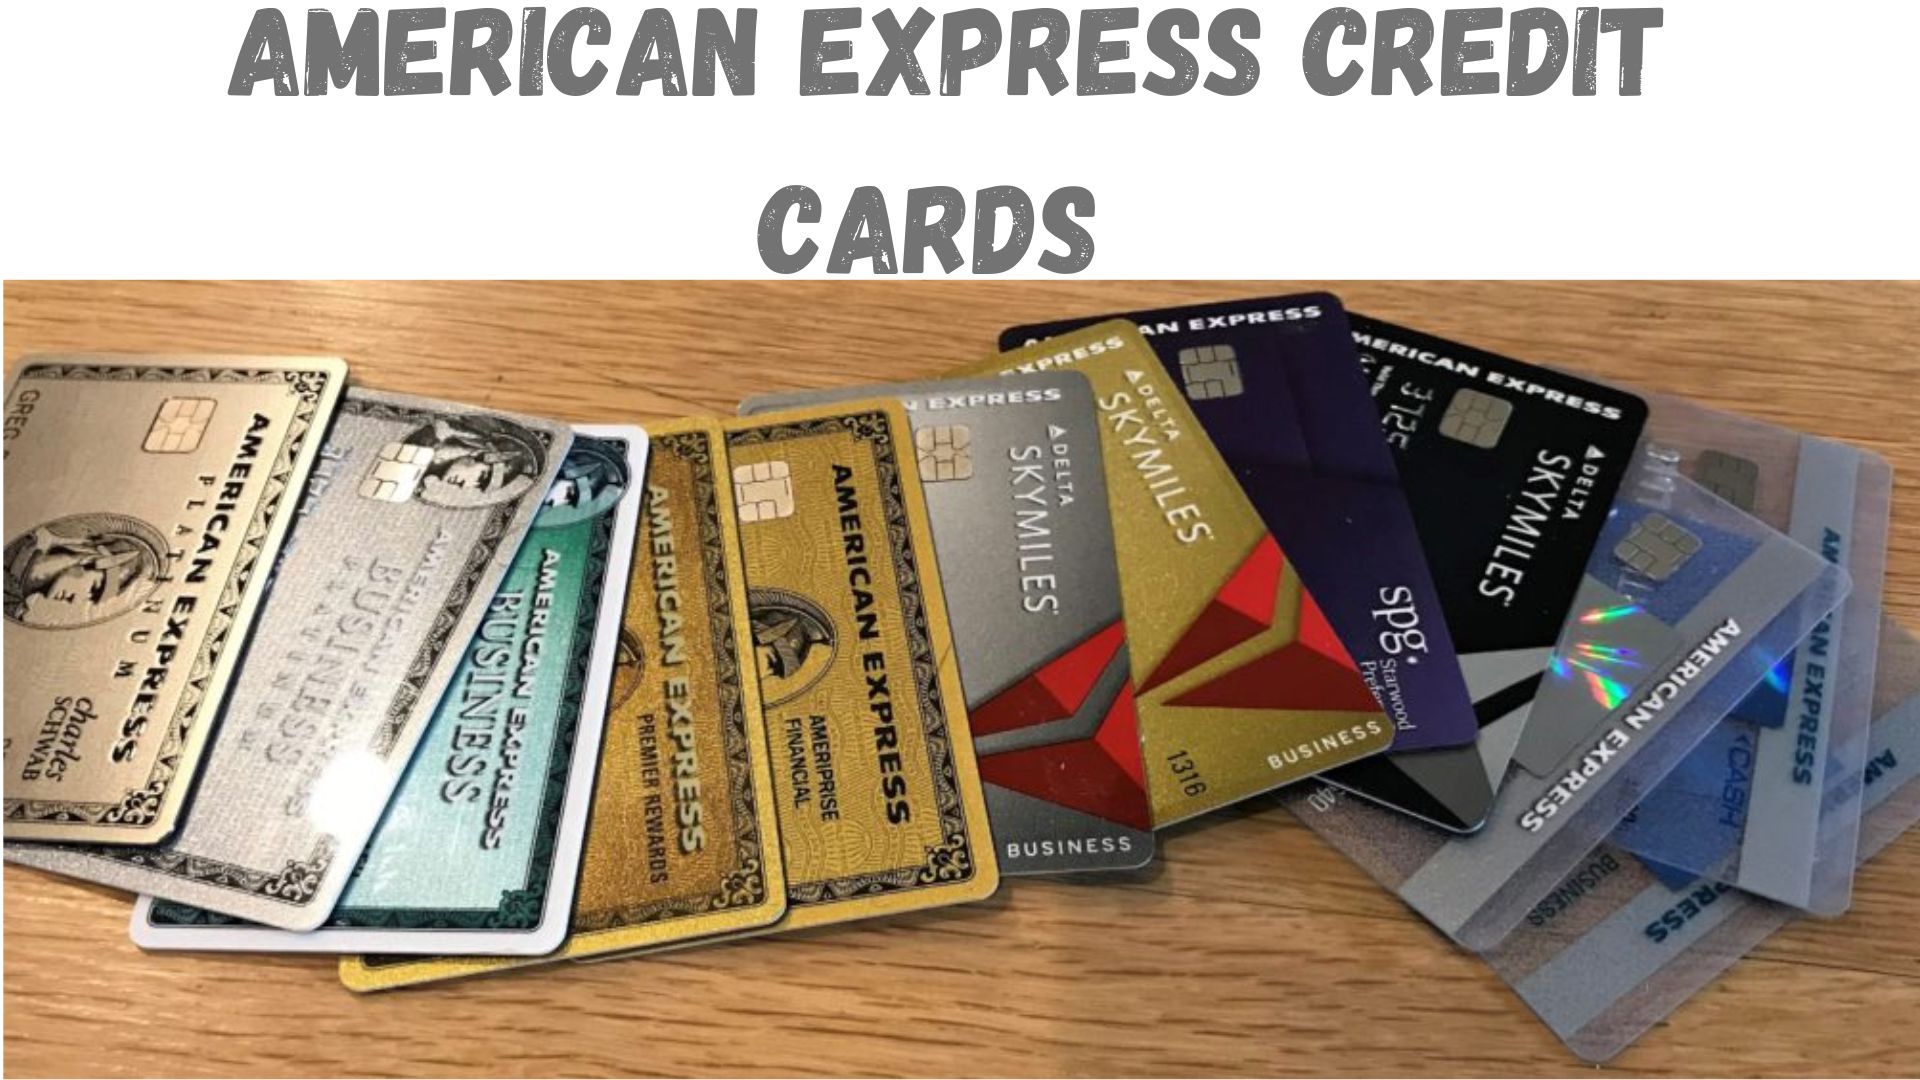 American Express Credit Cards Overview